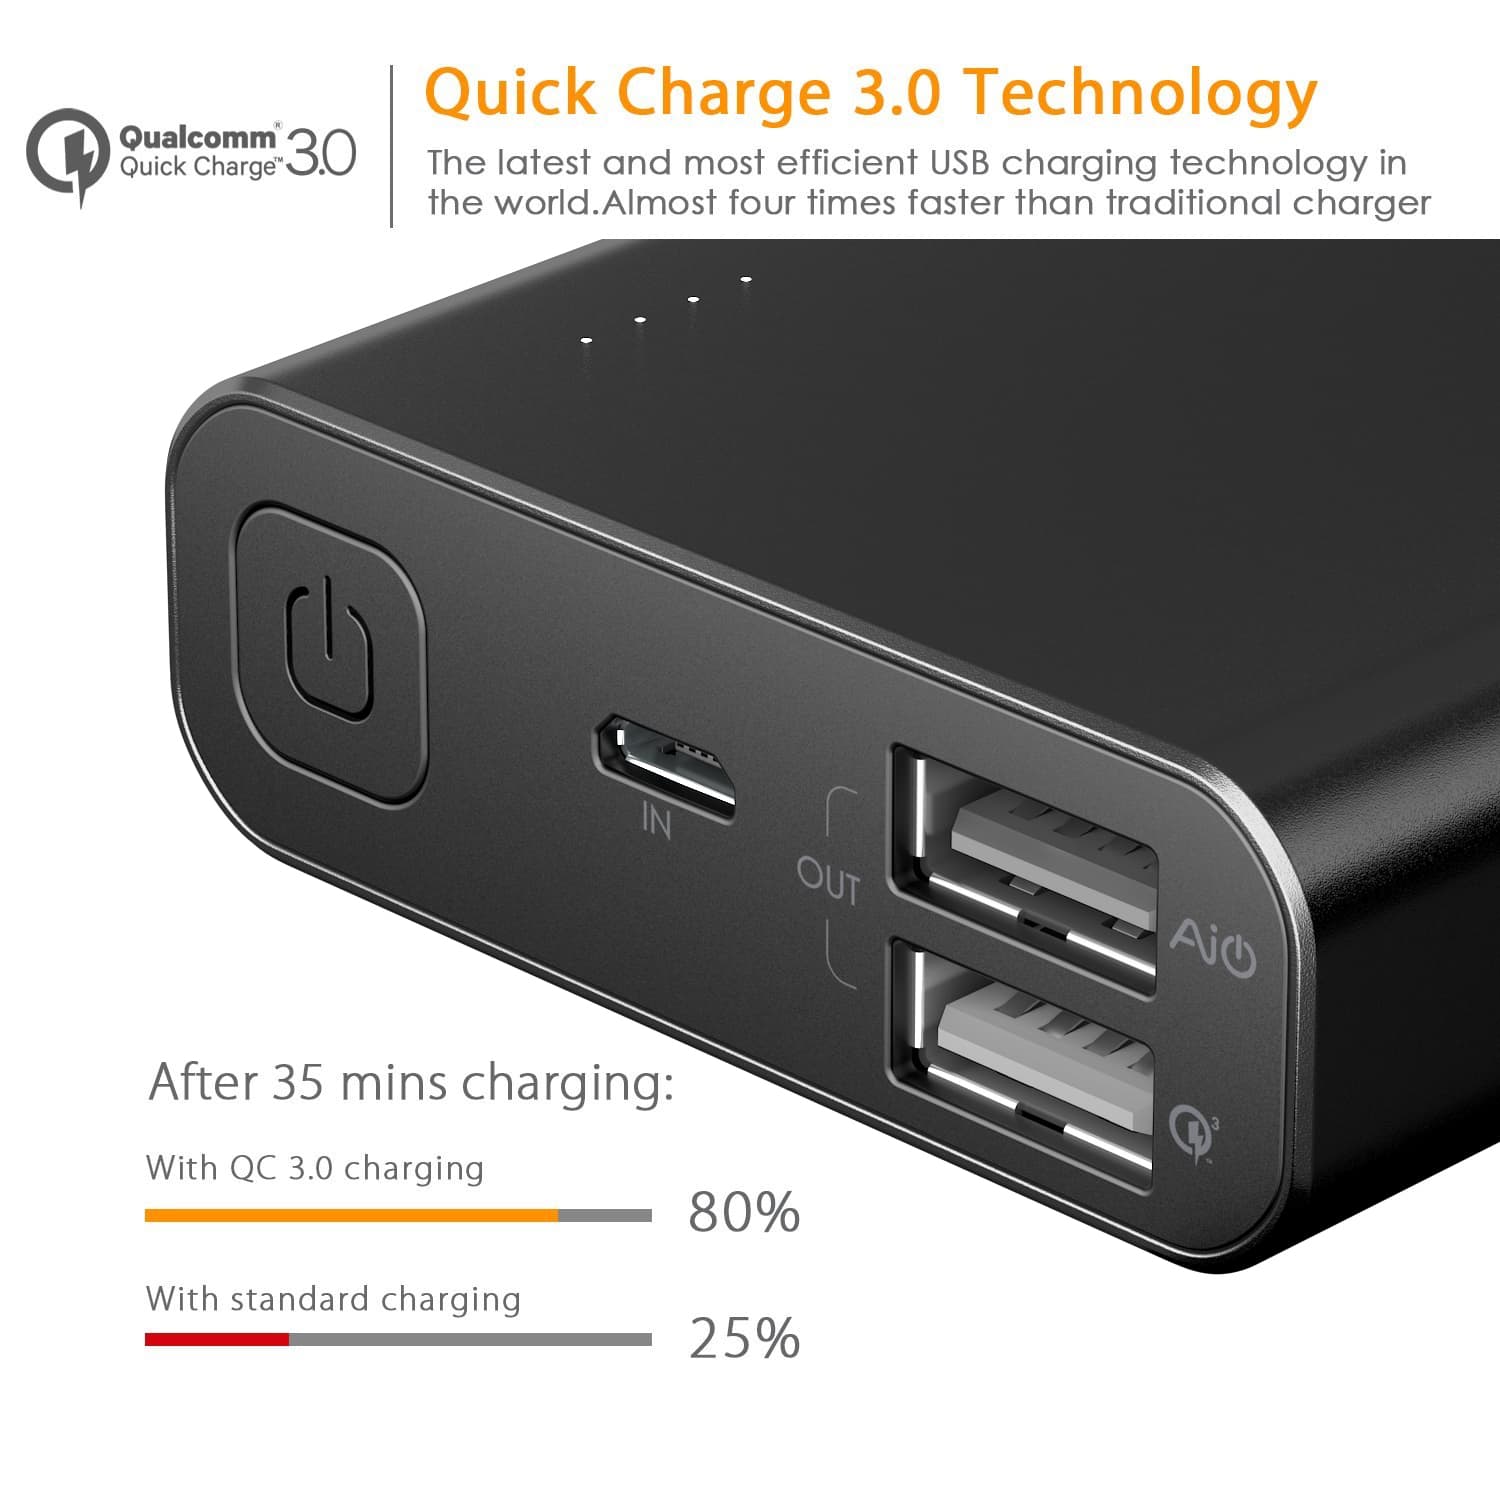 AUKEY PB-AT20 Premium 20100mAh Qualcomm Quick Charge 3.0 Power Bank - Aukey Malaysia Official Store